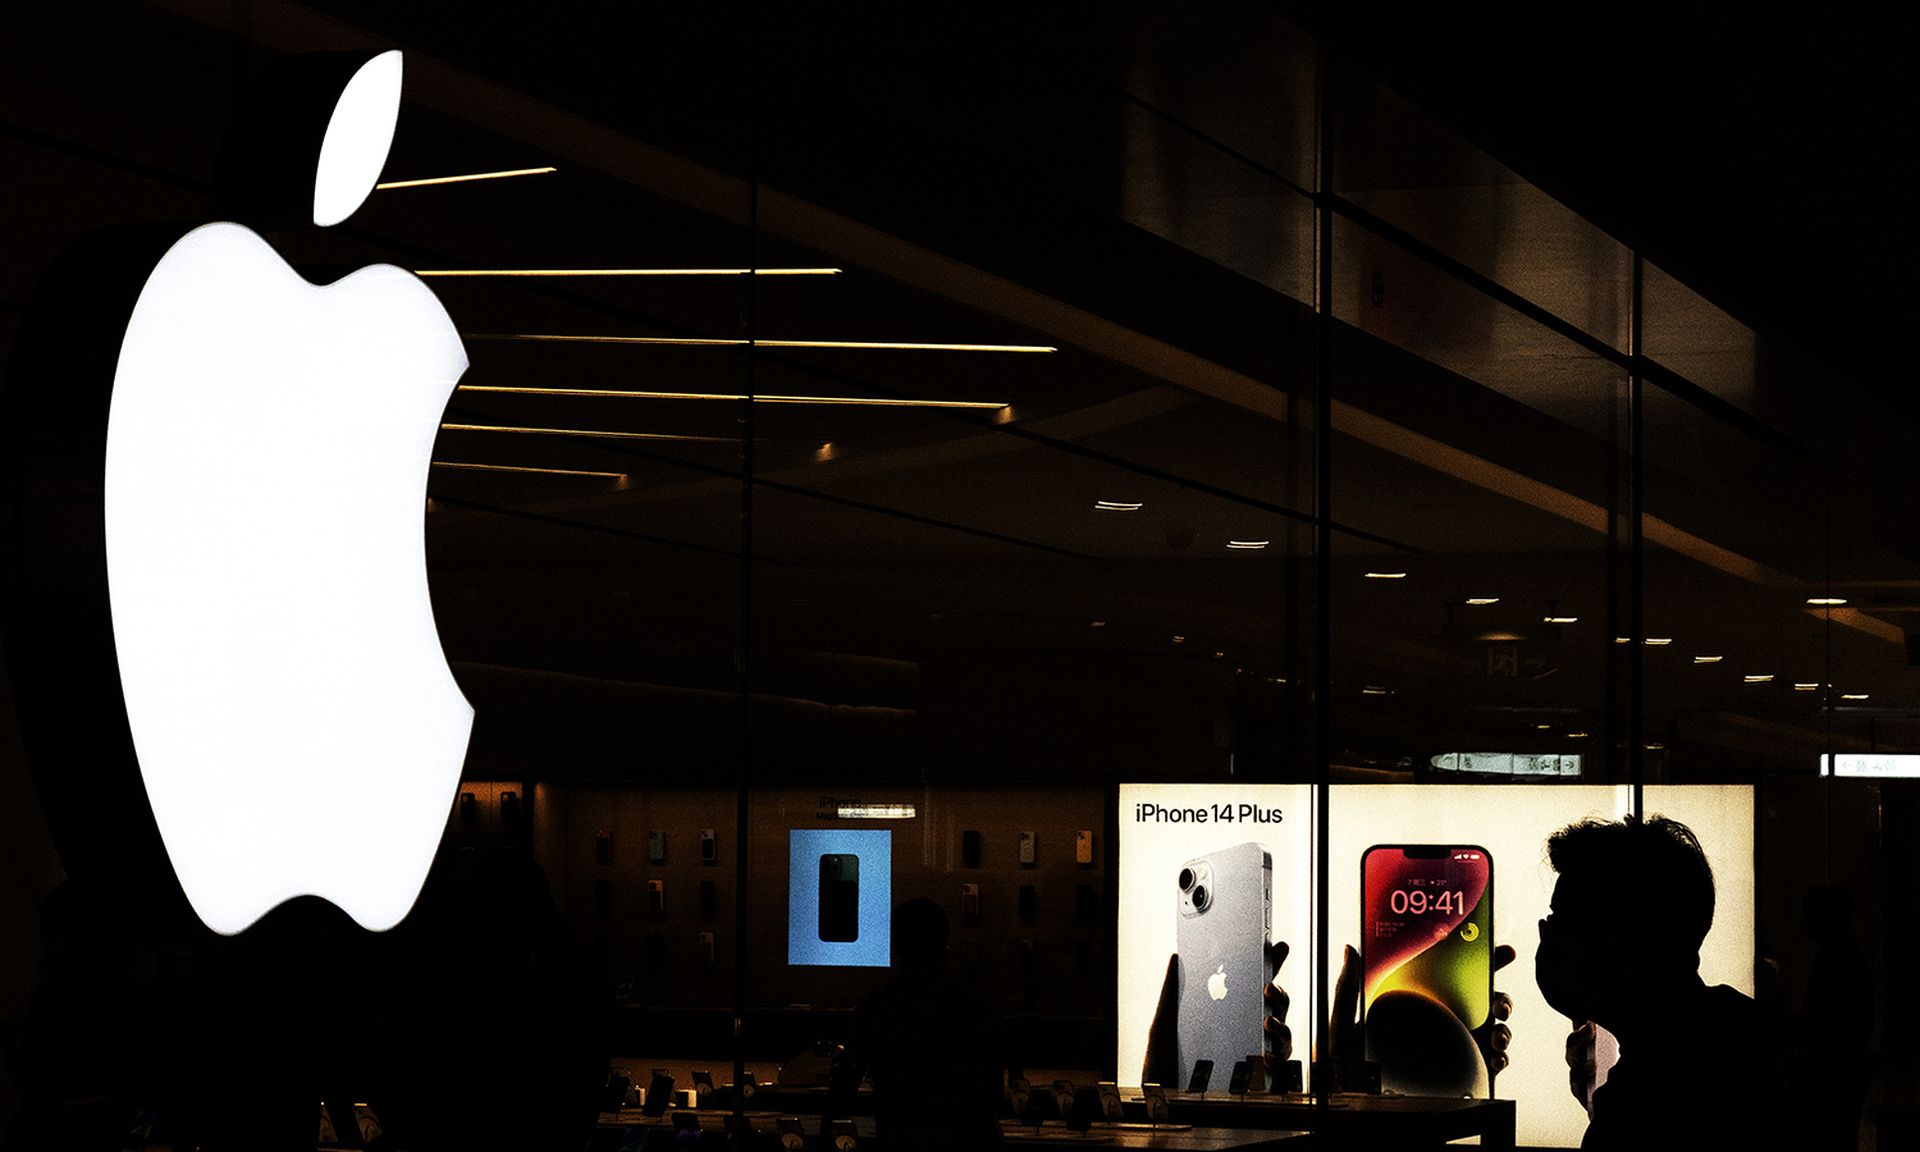 The Apple logo is seen at an Apple Store.